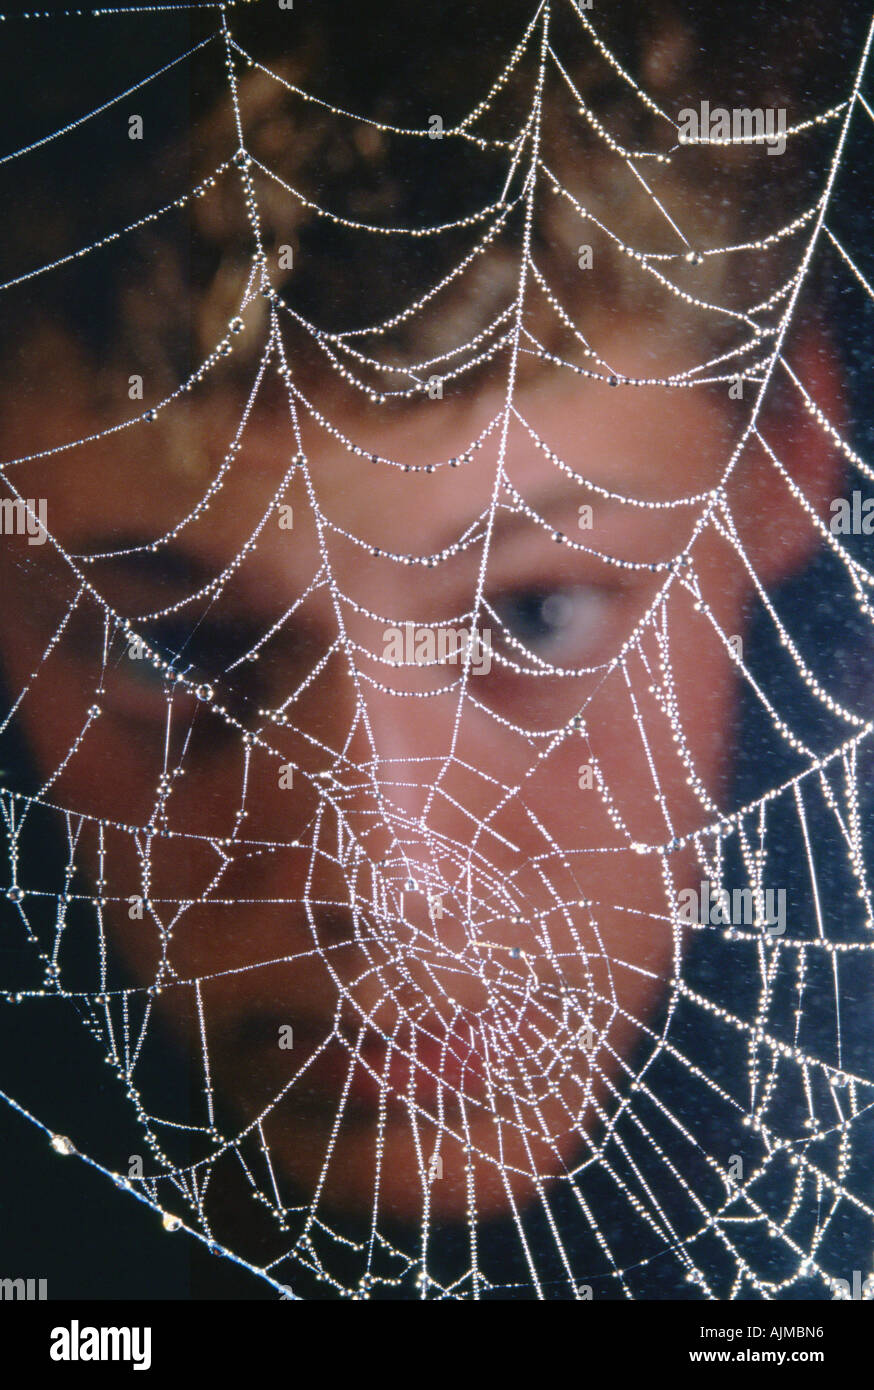 Close up of spiderweb with boy face observing it in the background Stock Photo